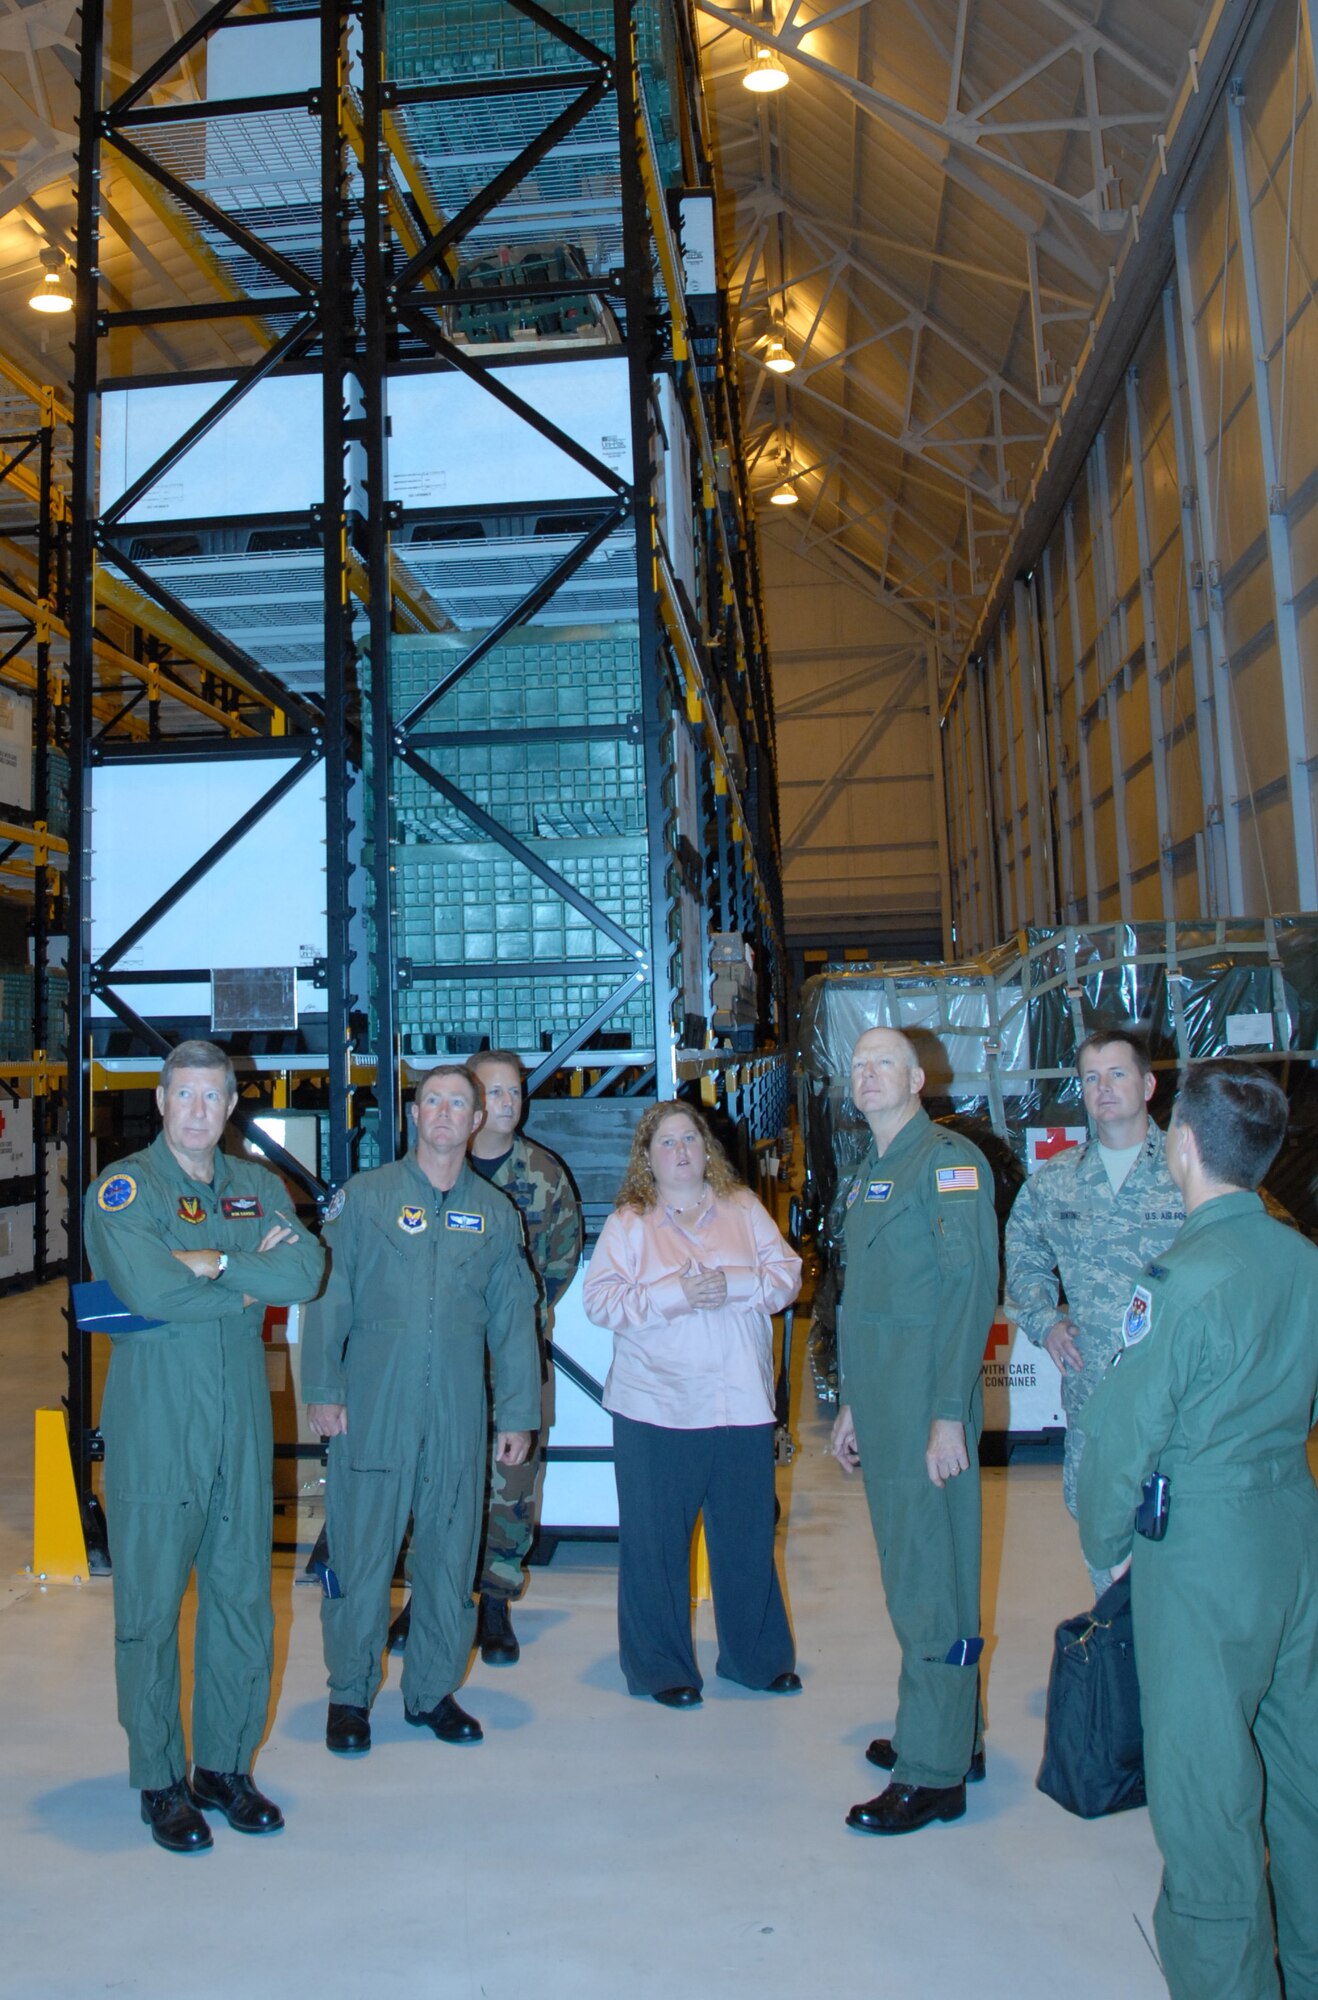 Maj Gen Tod Bunting, The Adjutant General of Kansas; 190th Air Refueling Wing personnel and NGB officials give Lt Gen (Dr) James Roudebush a tour of the EMEDS facility at Forbes Field. Gen Roudebush visited the 190th on September 8, 2007. Pictured - (L-R): Maj Gen Ron Dardis, The Adjutant General-Iowa; Maj Gen Ray Webster, ANG Assistant to the AF/SG; Lt Col Tim Stevens, 190th Medical Administrative Officer; Ms. Stacey Selvidge, EMEDS Contractor; Lt Gen James G.
Roudebush, Surgeon General of the Air Force; Maj Gen Tod Bunting, The Adjutant General-Kansas; Col Chip Riggins, Surgeon General of the ANG). (Photo by: Master Sgt Allen Pickert, 190th ARW/PA)